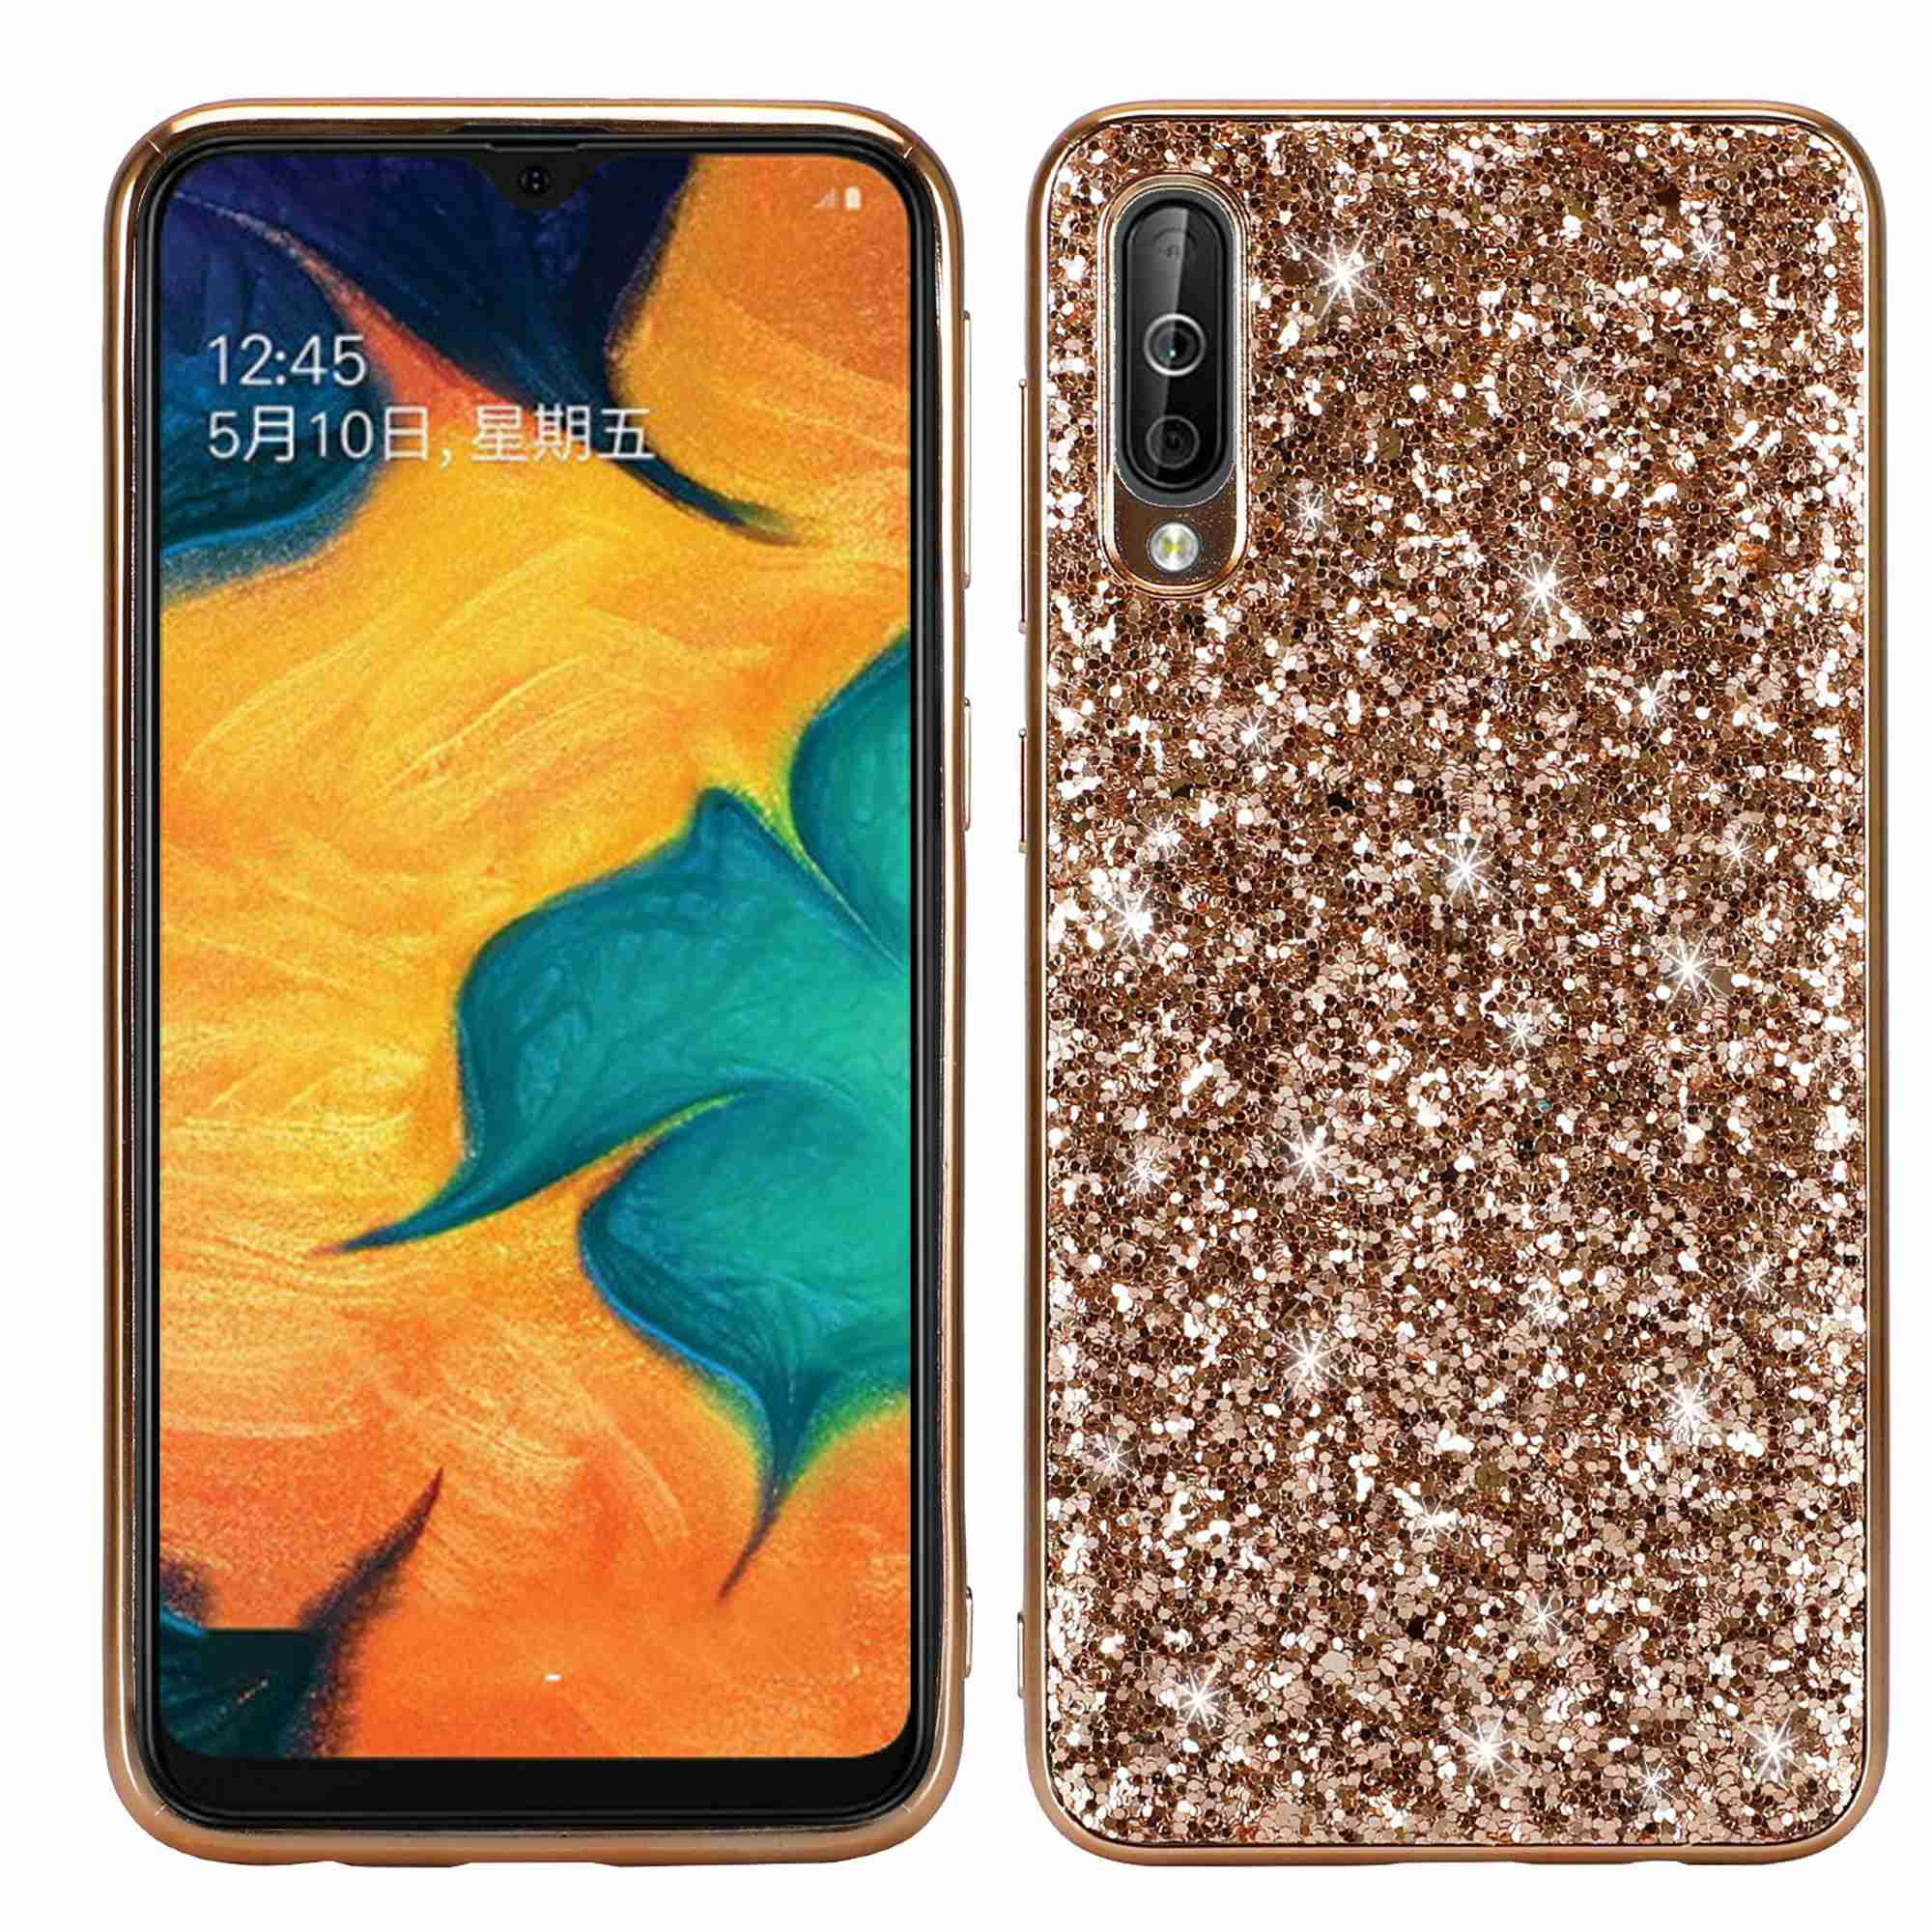 PHEZEN Case for Galaxy A10 Glitter Case,Women Girl Glitter Sparkle Bling Shockproof Hard PC Shell Soft Silicone TPU Bumper Protective Phone Cover for Galaxy A10 Rose Gold 